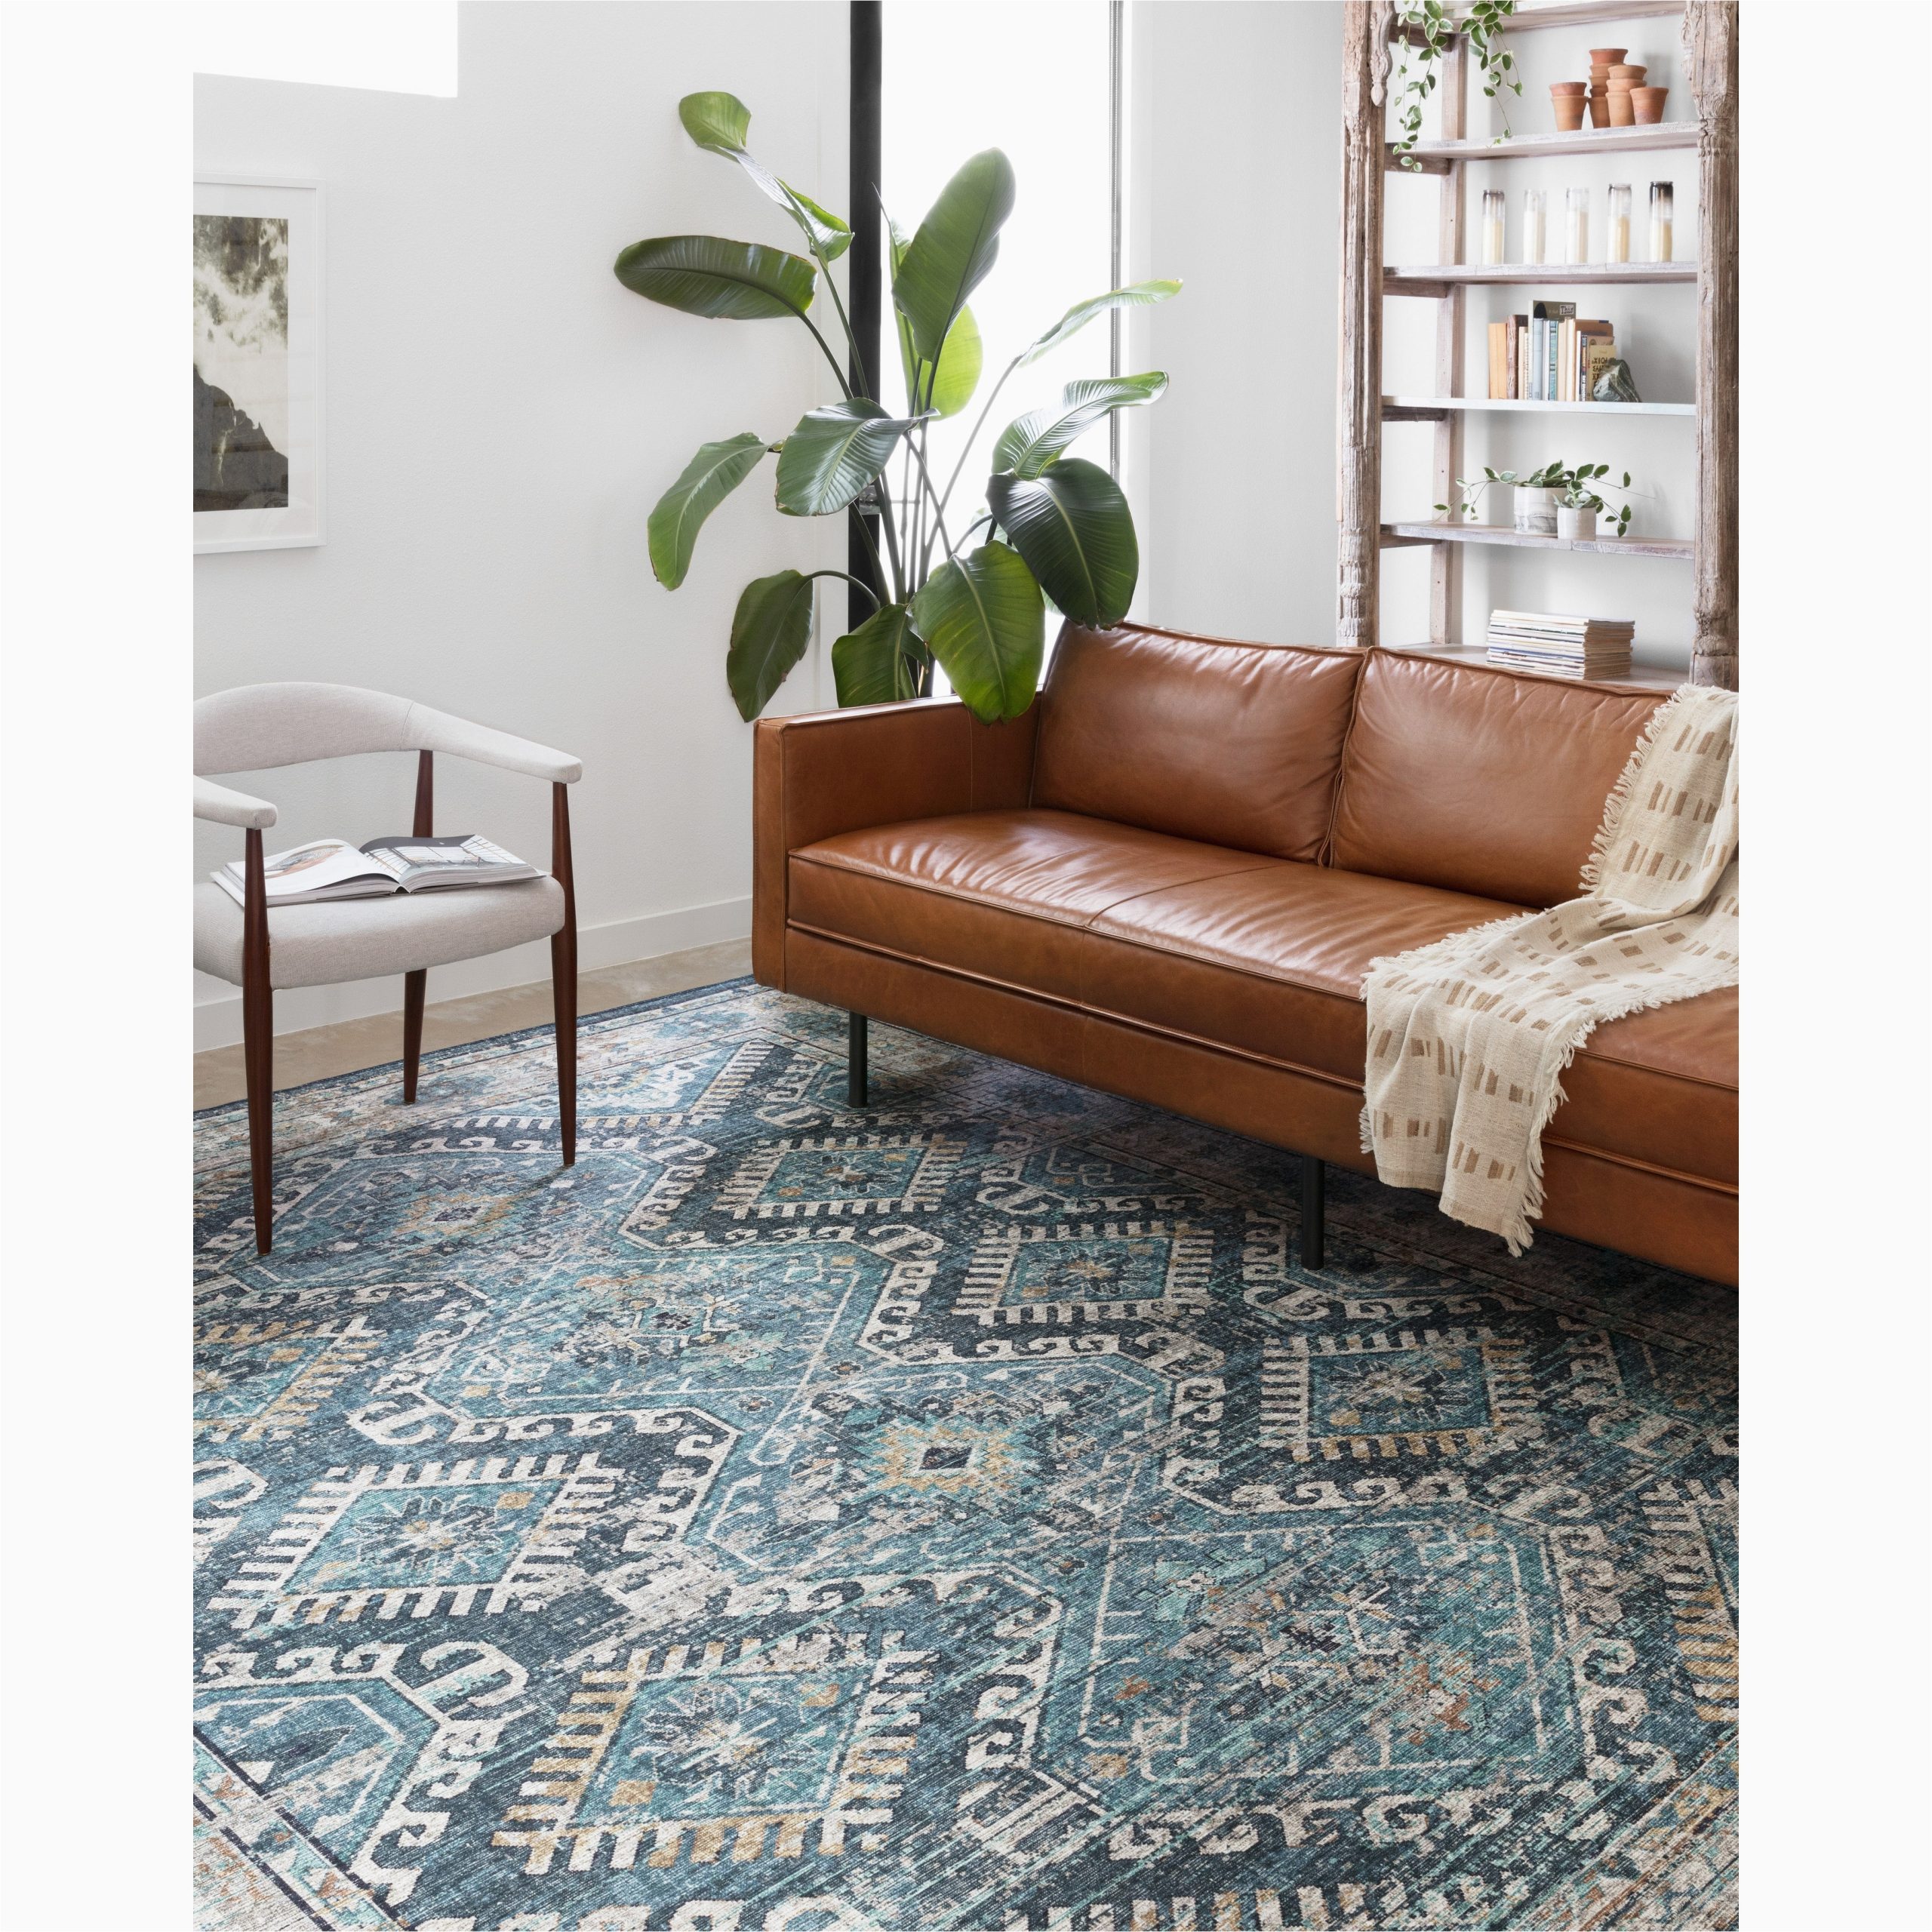 Alexander Home Leanne Traditional Distressed area Rug Alexander Home Leanne Boho Distressed Persian Printed area Rug Turquoise / Terracotta 9′ X 12′ 9′ X 12′ Indoor Living Room, Bedroom, Dining Room